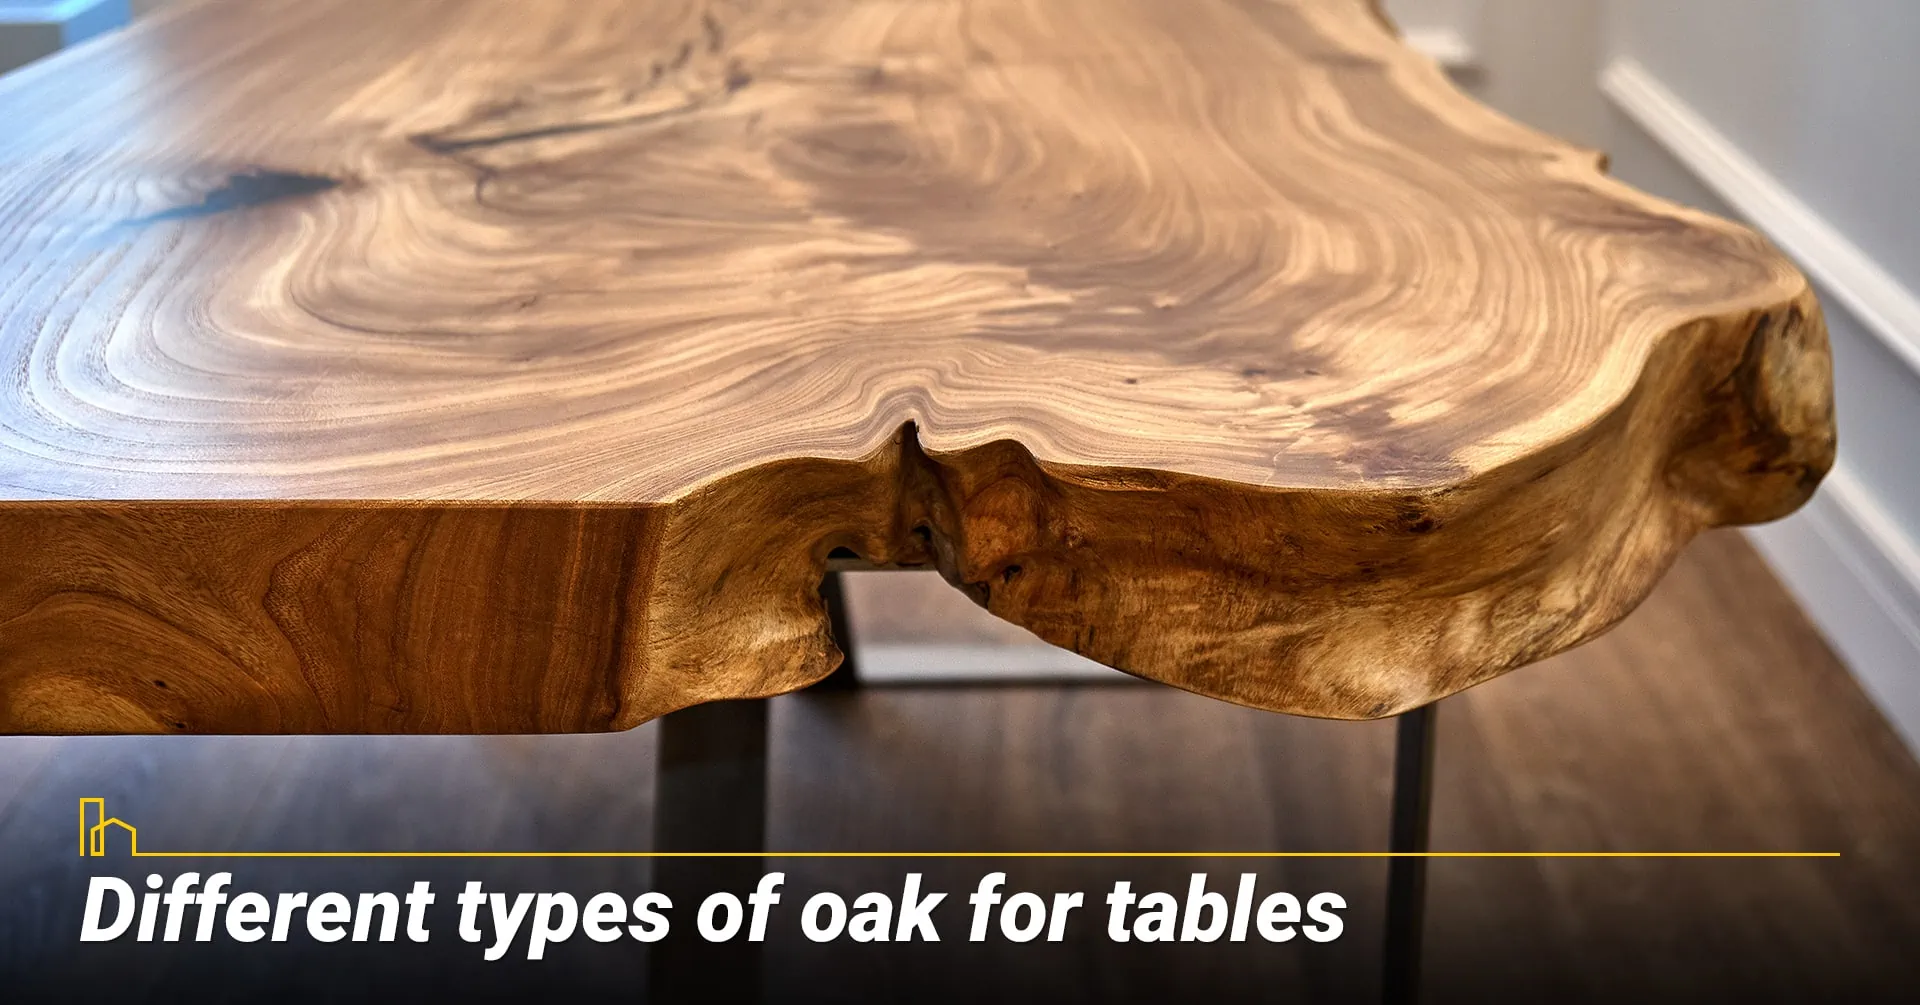 2. Different types of oak for tables